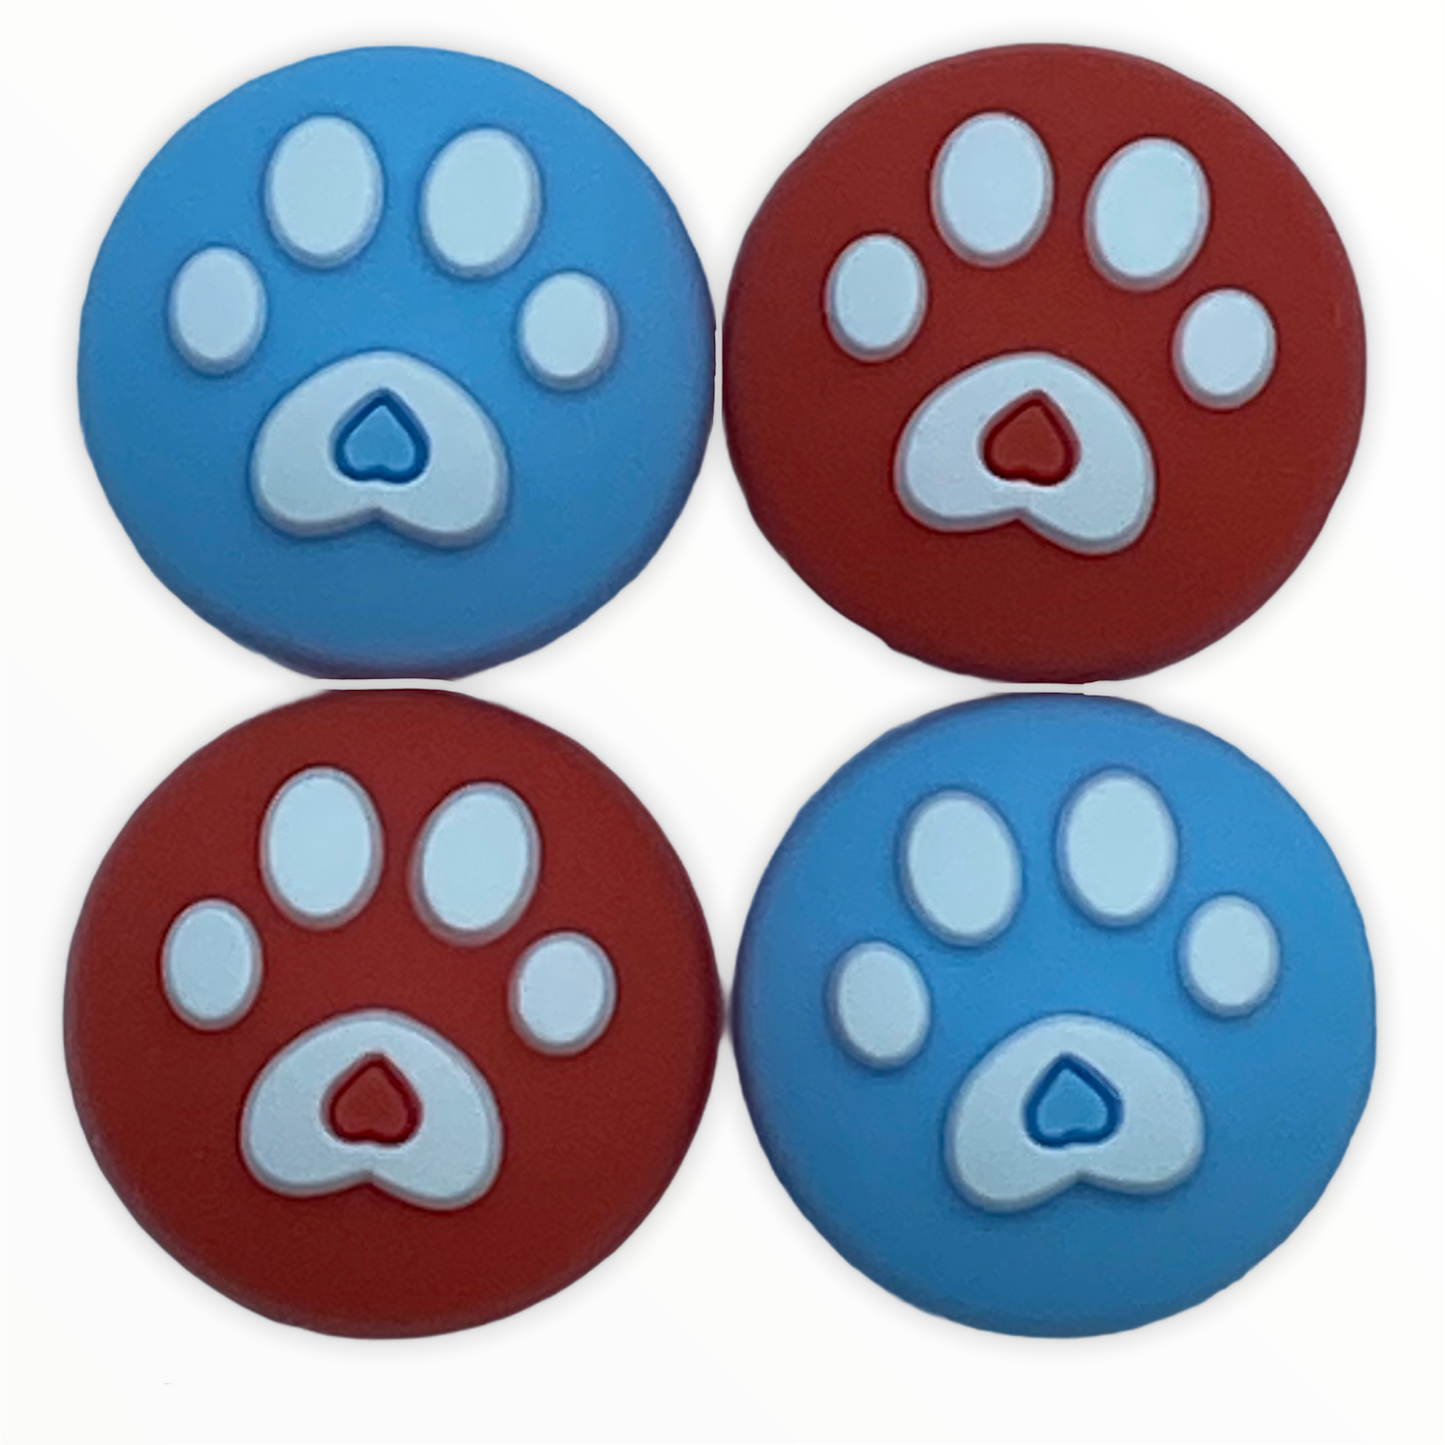 JenDore Red & Blue 4Pcs Paw Silicone Thumb Grip Caps for Nintendo Switch